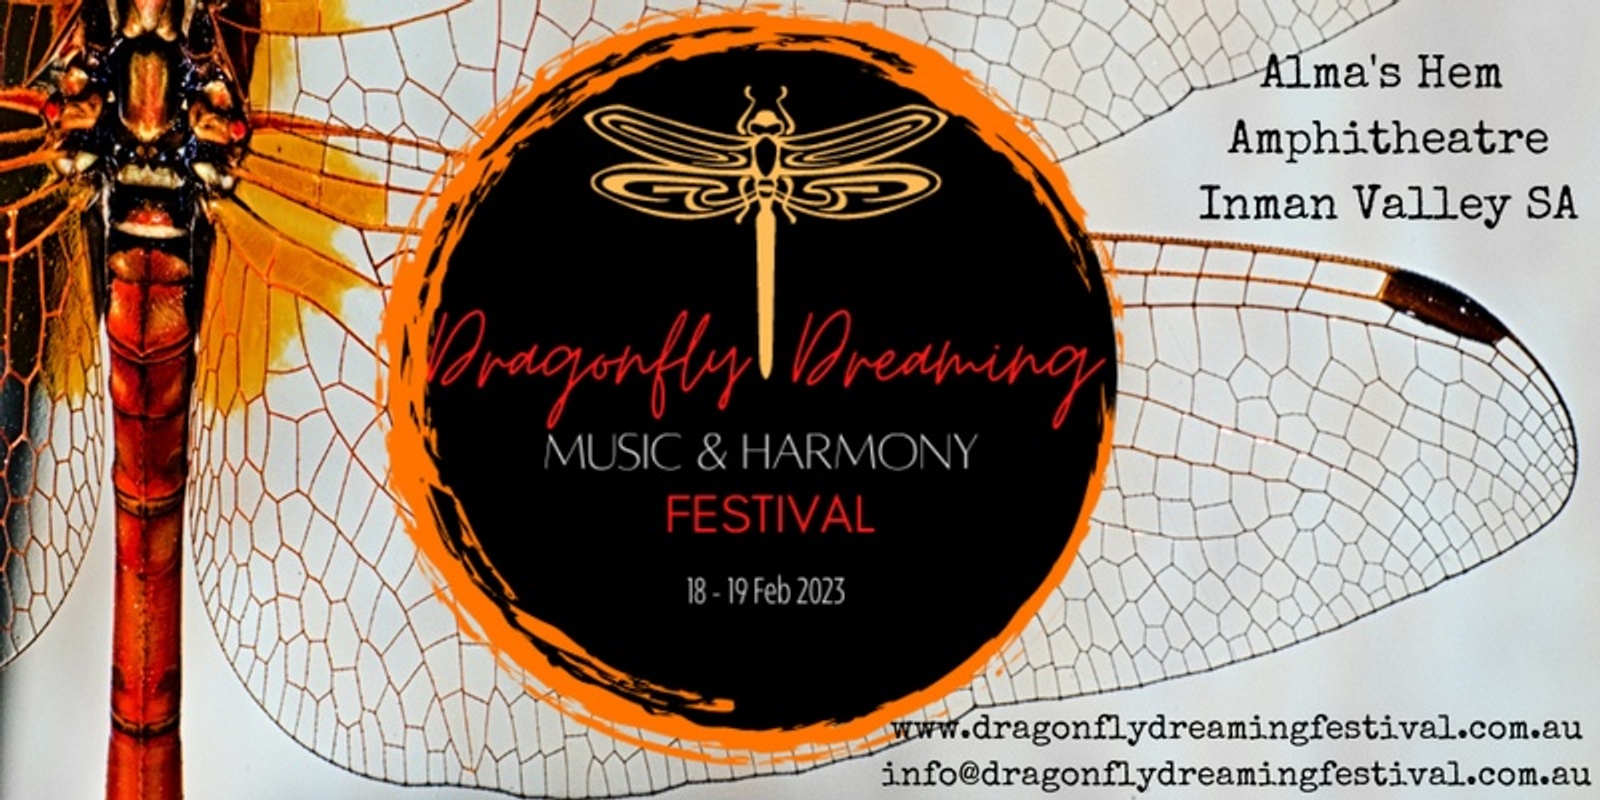 Banner image for Dragonfly Dreaming Music & Harmony Festival